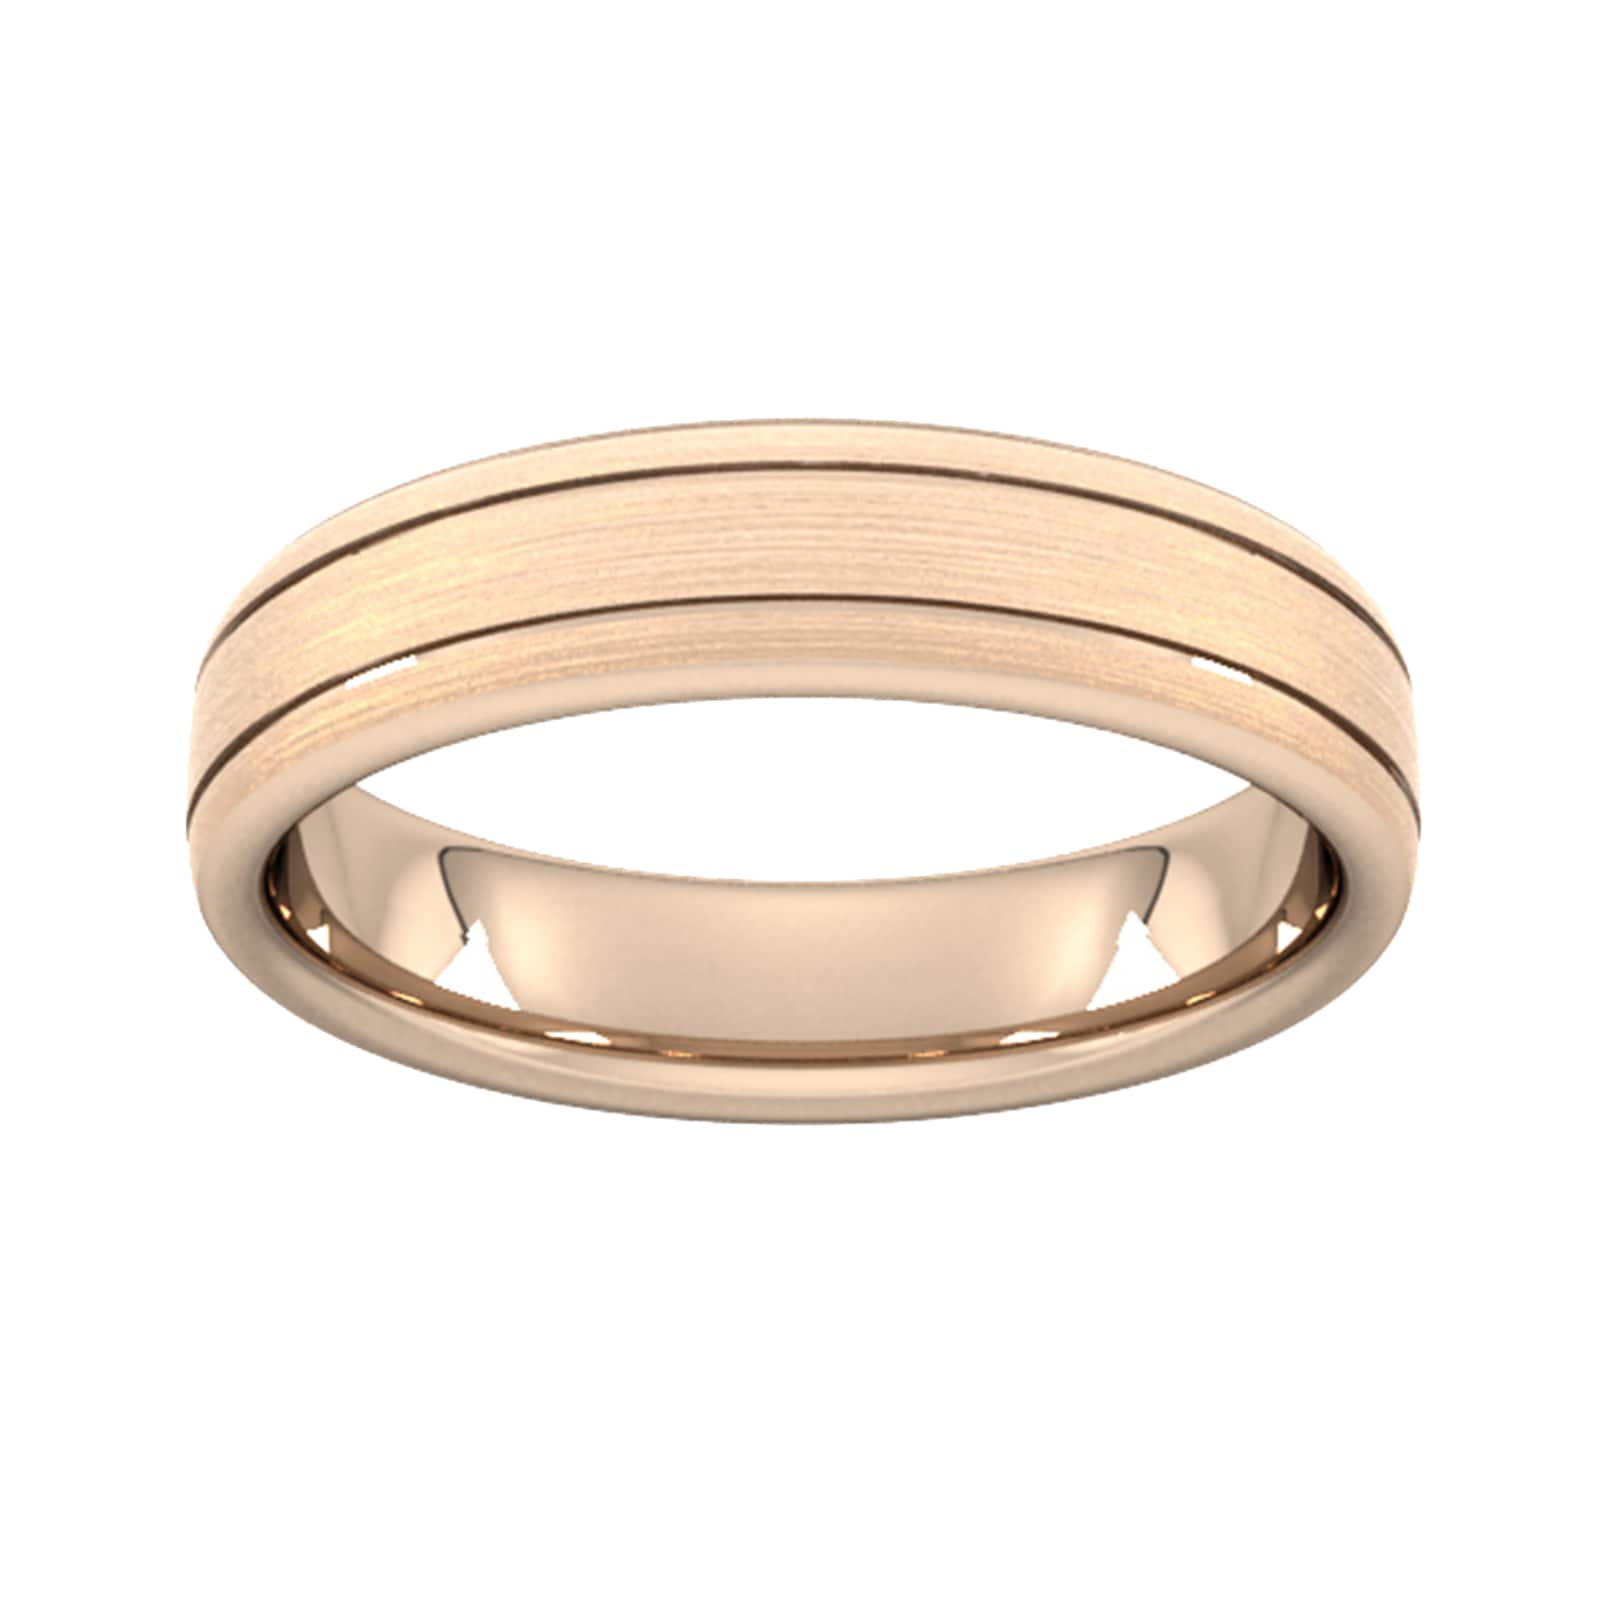 5mm Slight Court Extra Heavy Matt Finish With Double Grooves Wedding Ring In 18 Carat Rose Gold - Ring Size H